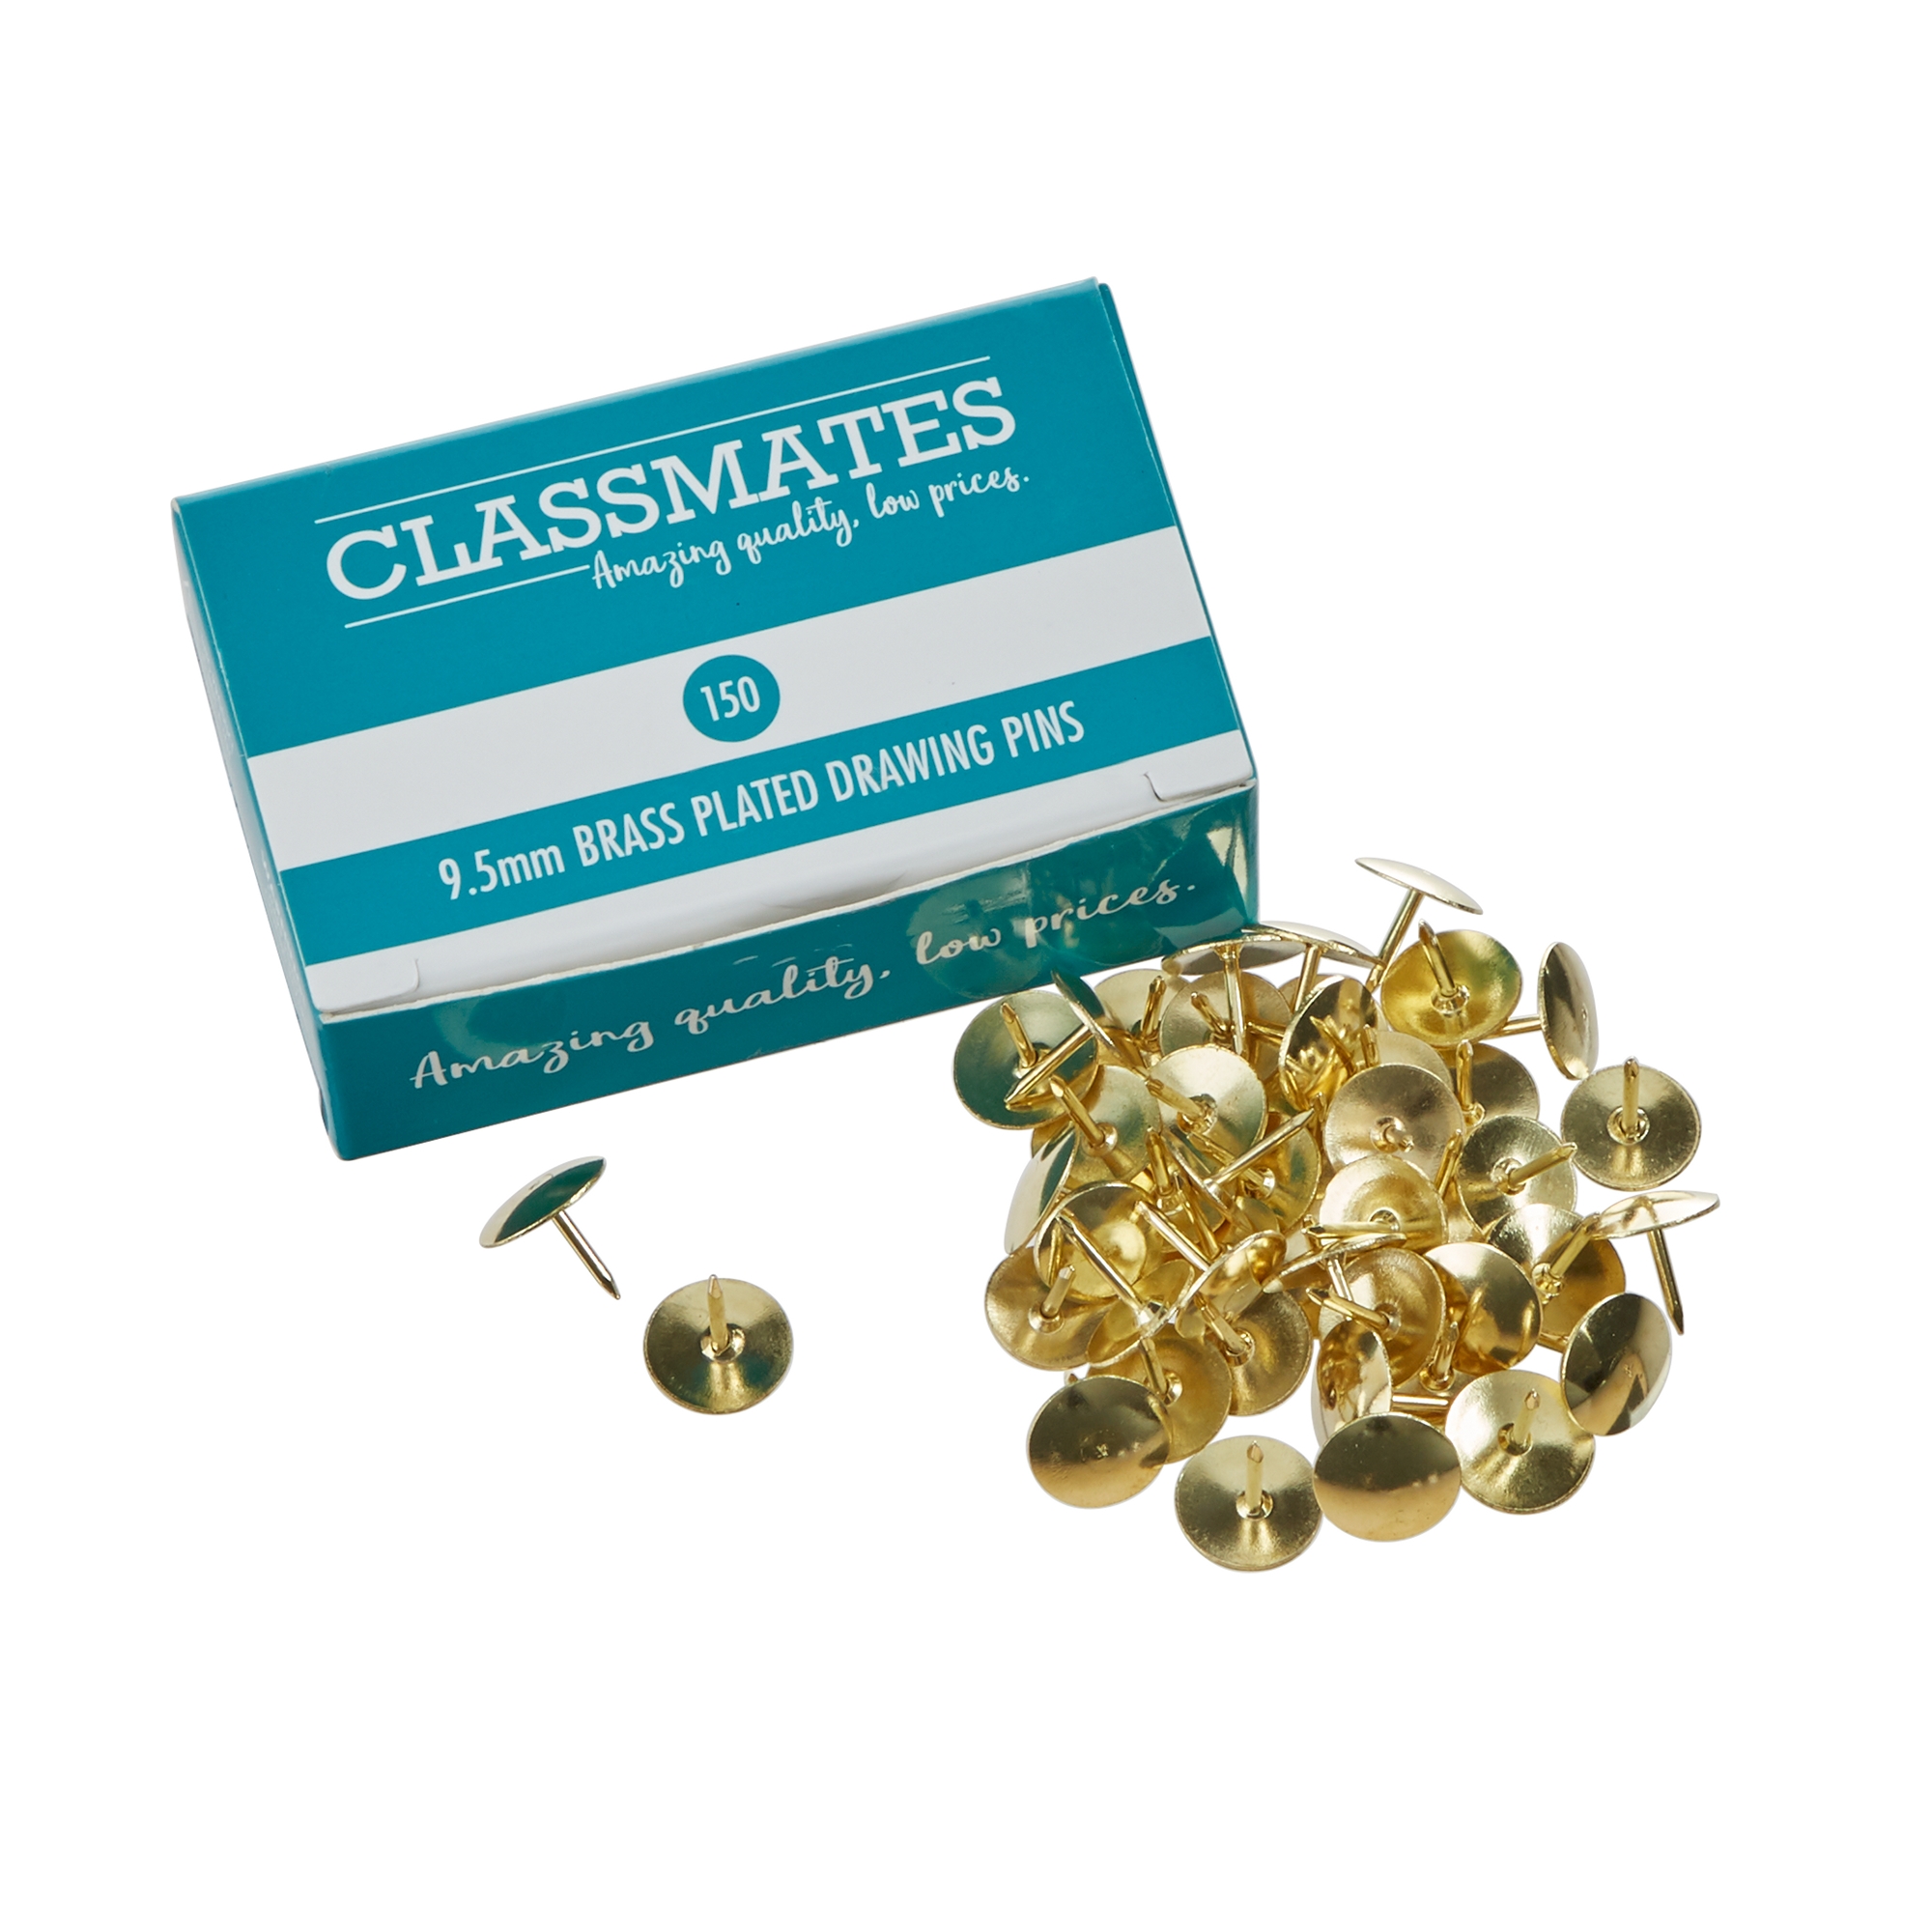 Classmates Drawing Pins 9.5mm - Pack of 150